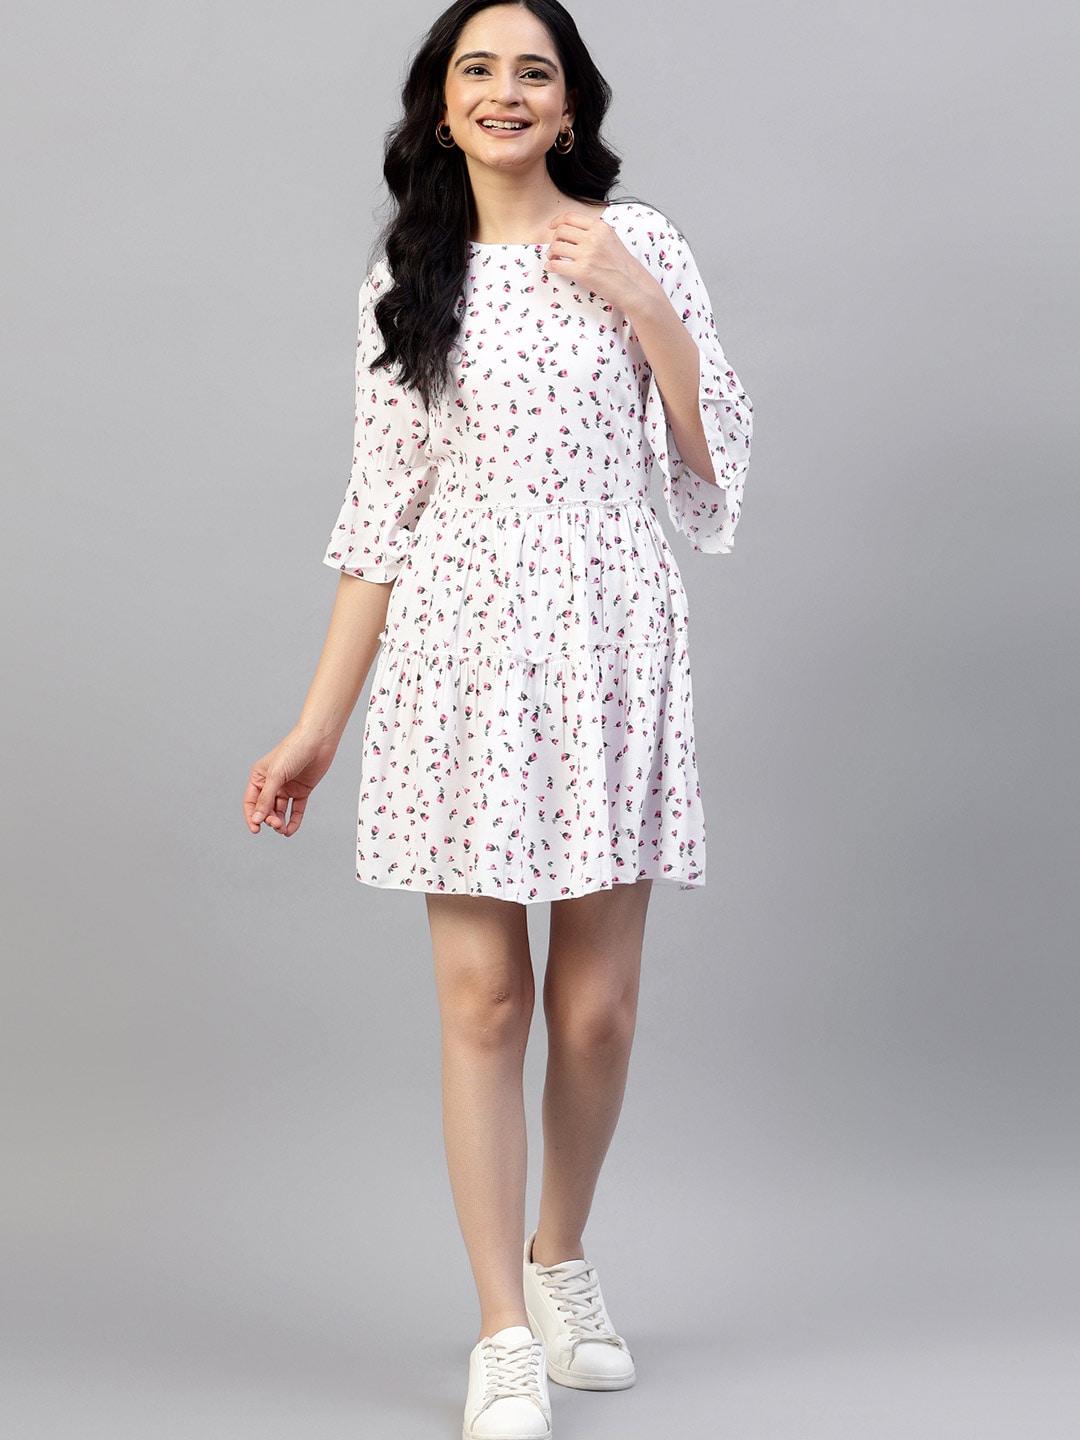 hencemade floral printed bell sleeve tiered fit & flare dress